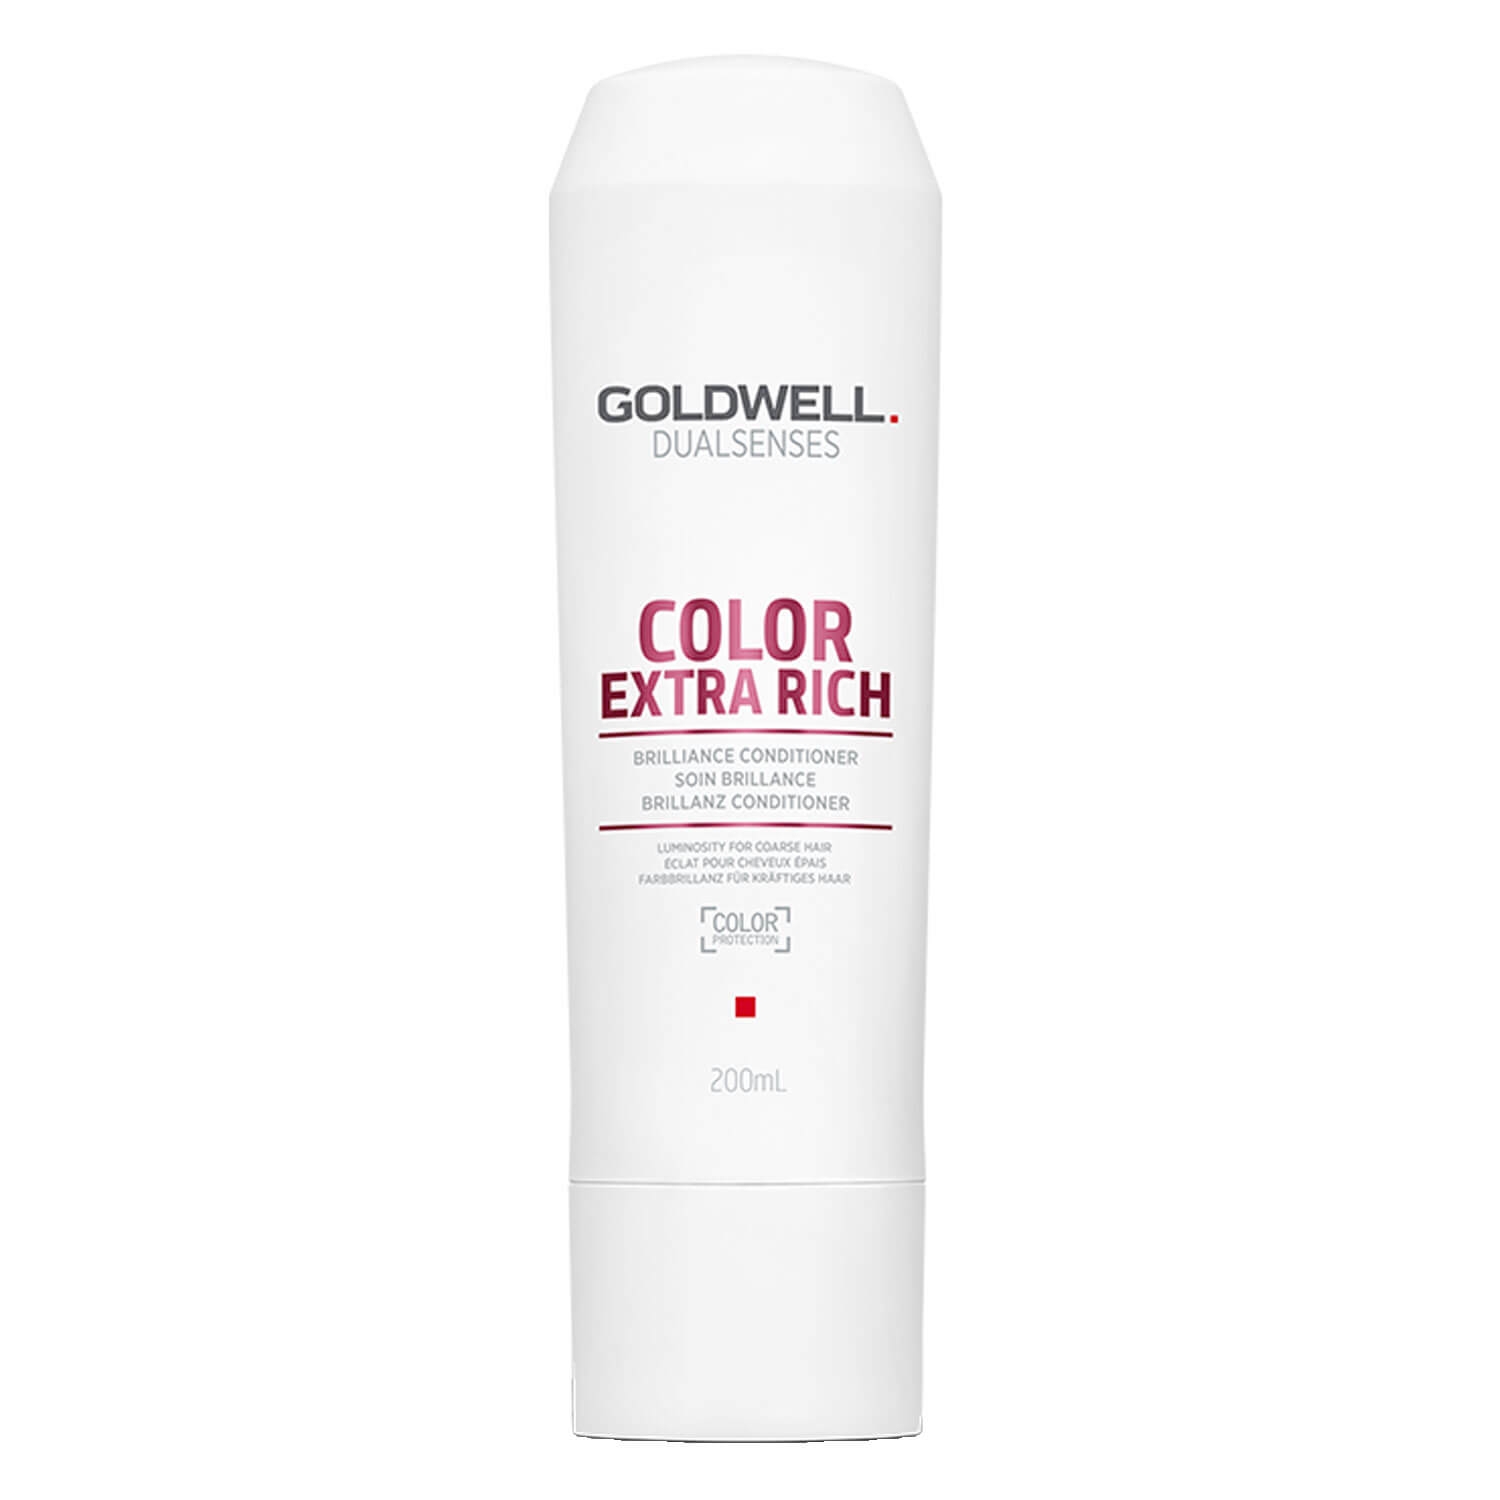 Product image from Dualsenses Color Extra Rich - Brilliance Conditioner